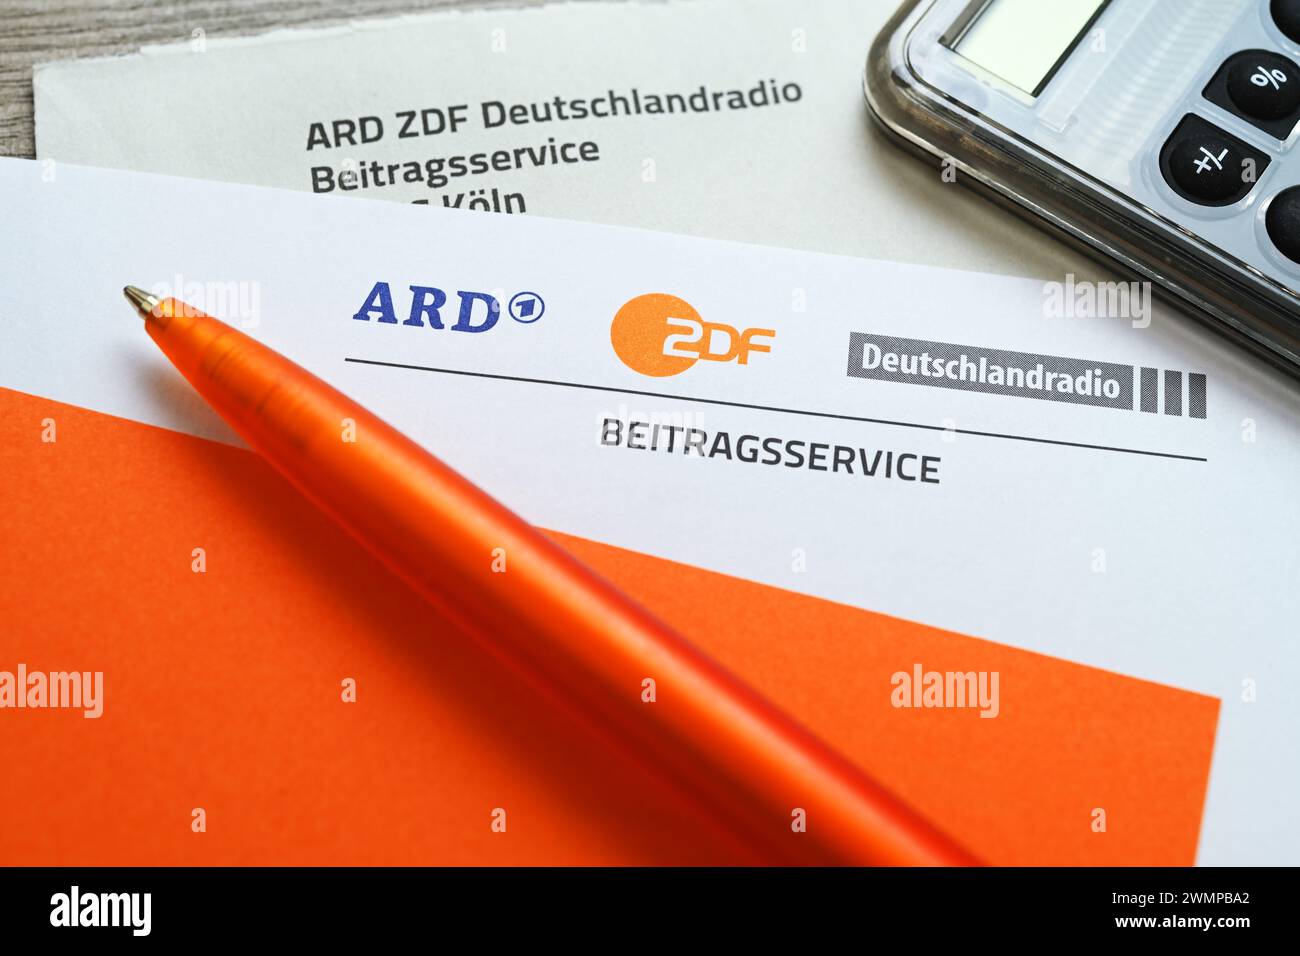 Letter From The ARD ZDF Deutschlandradio Beitragsservice With Calculator, Symbolic Photo Increase In The Broadcasting Fee Stock Photo